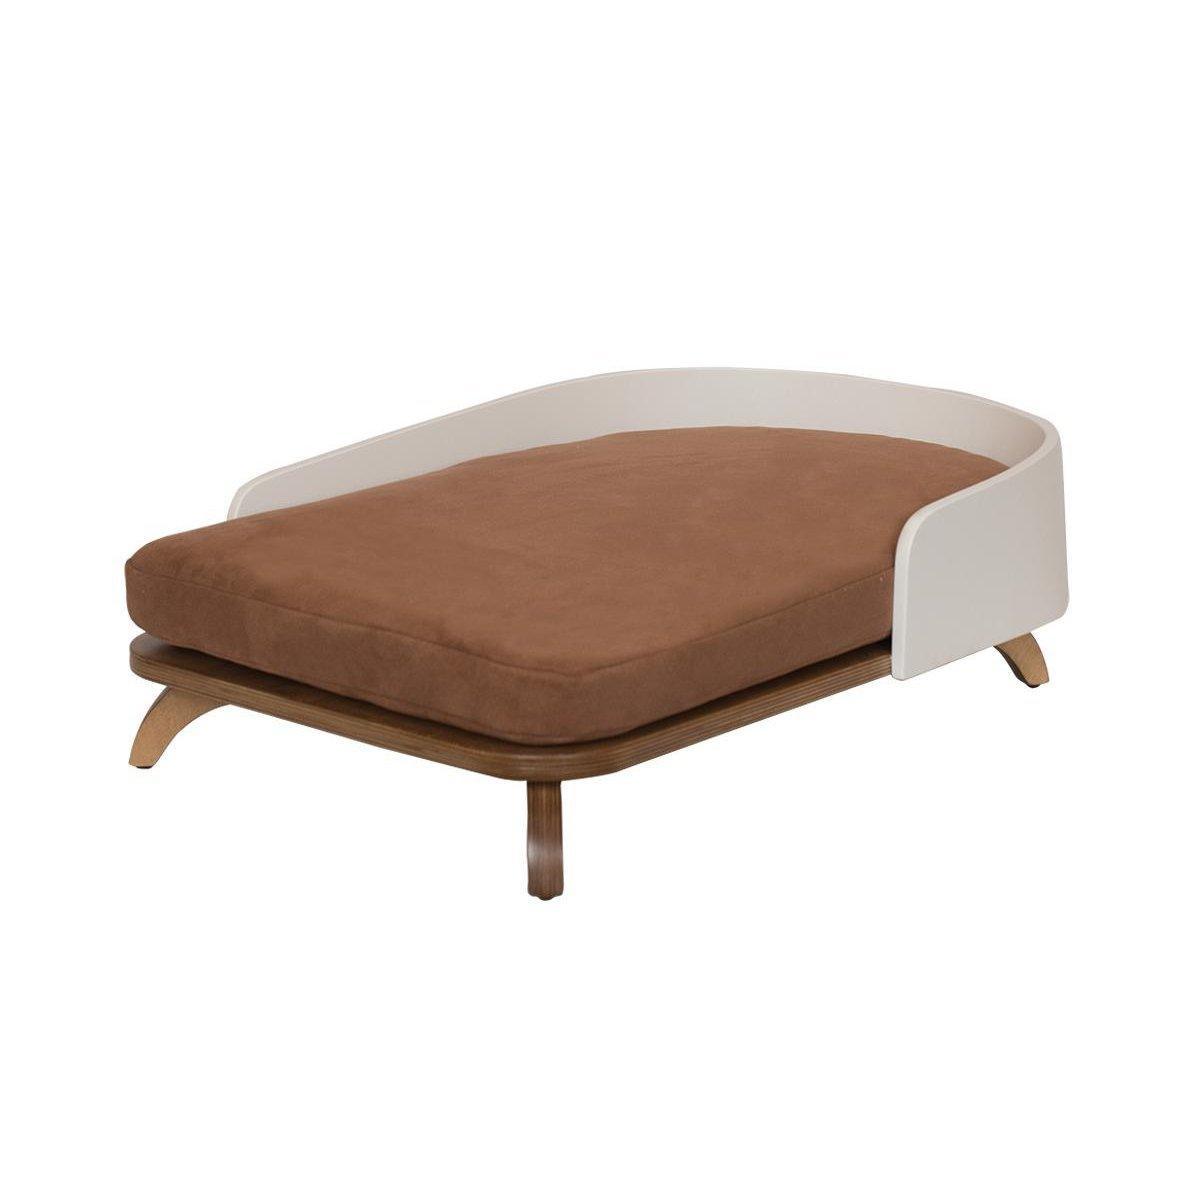 Cat Bed Milos - Cat Beds - Luxury Dog House - ewoodcollection.com